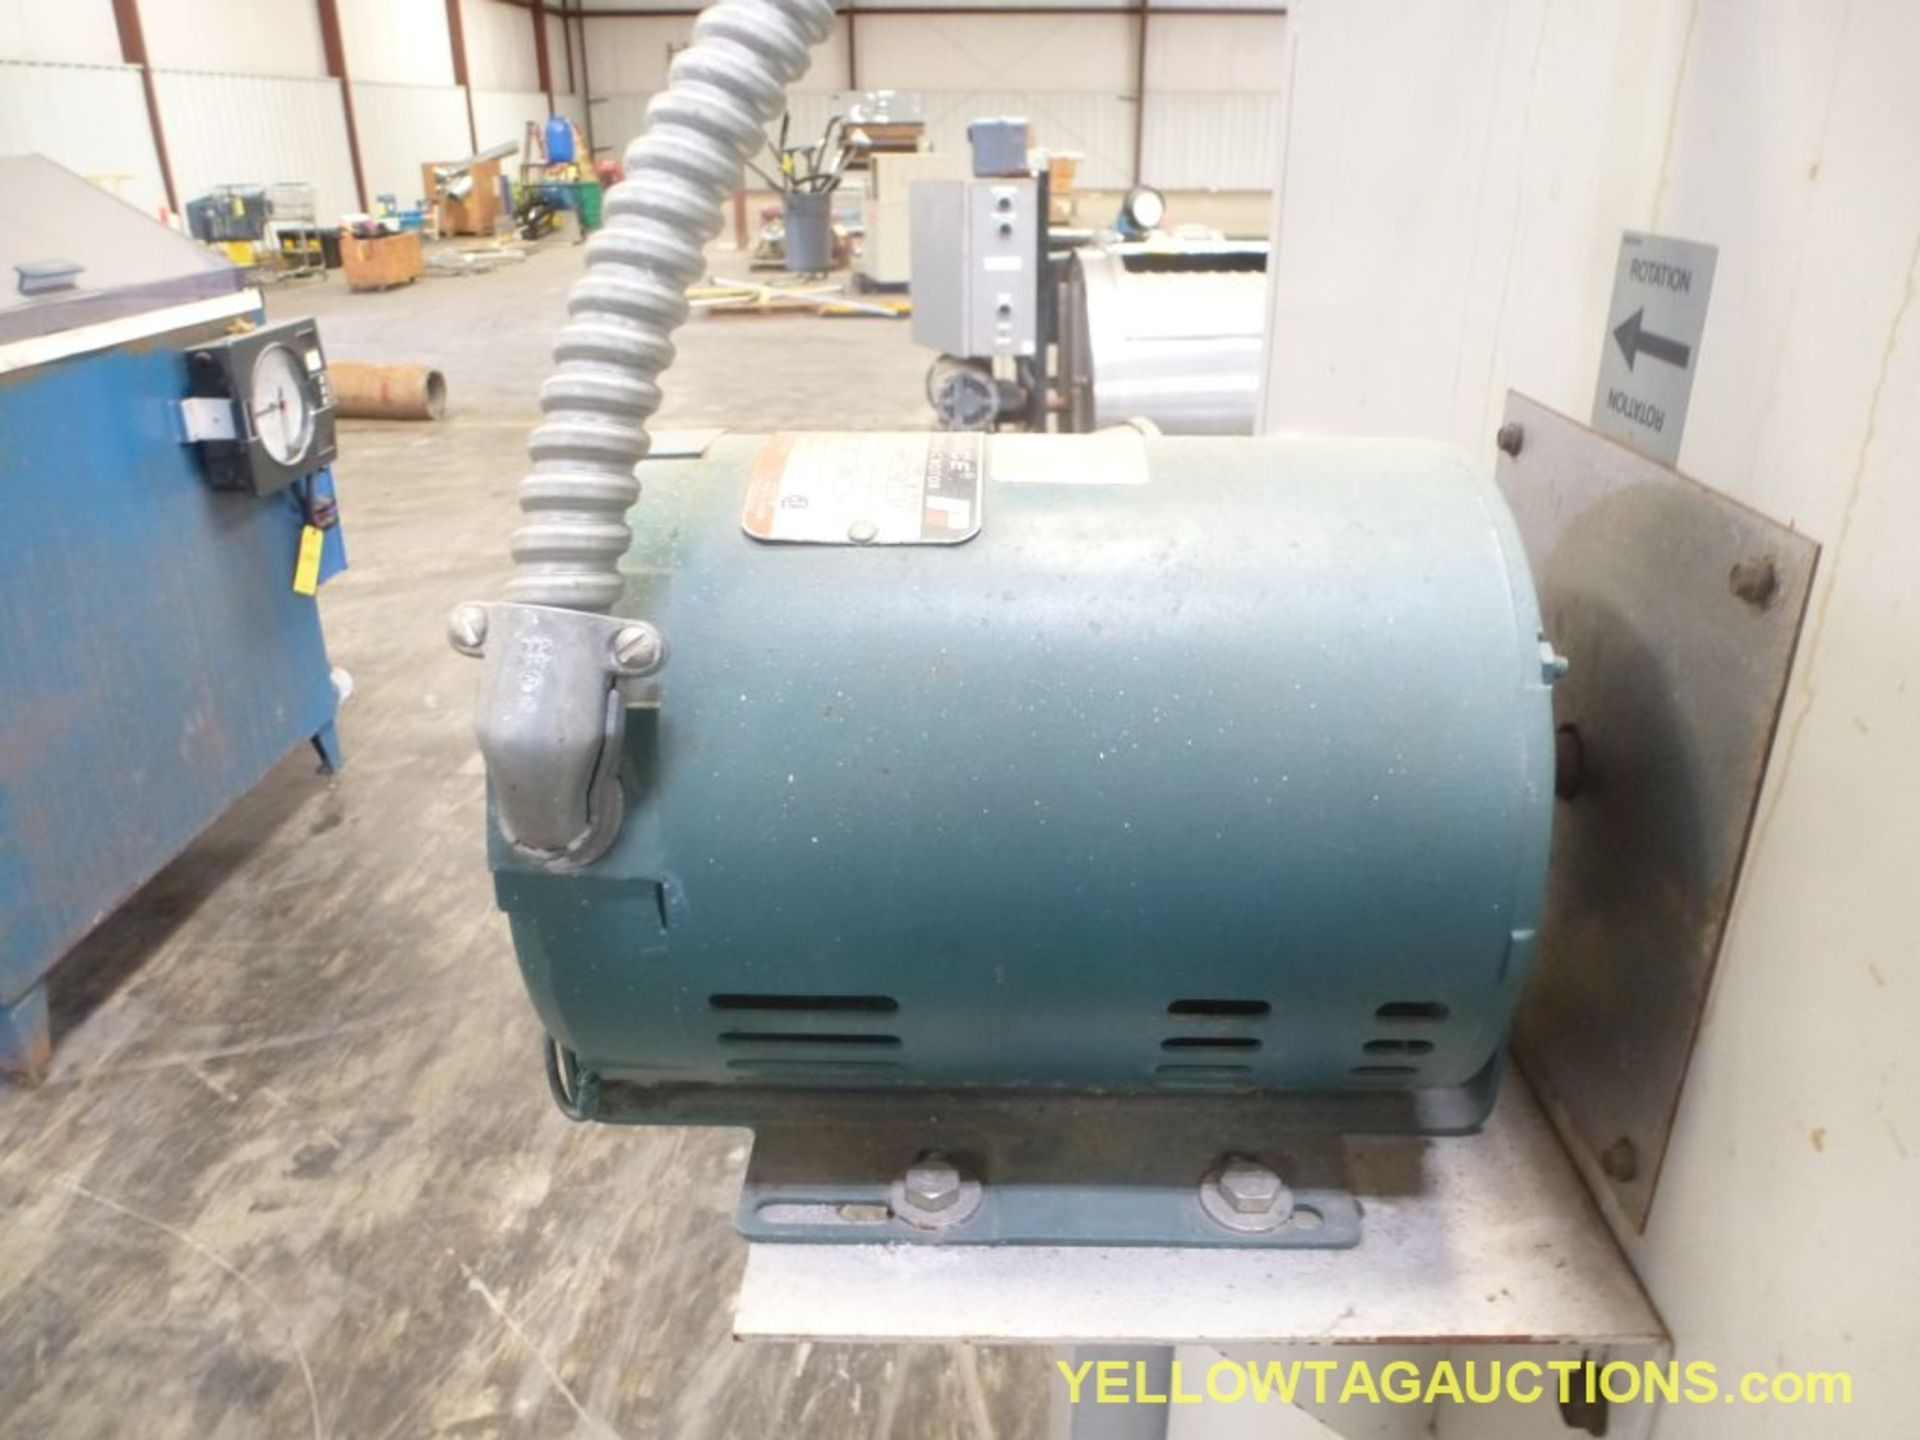 Despatch Gas Oven|With Purge FanLocation: YTA Warehouse - Image 14 of 17